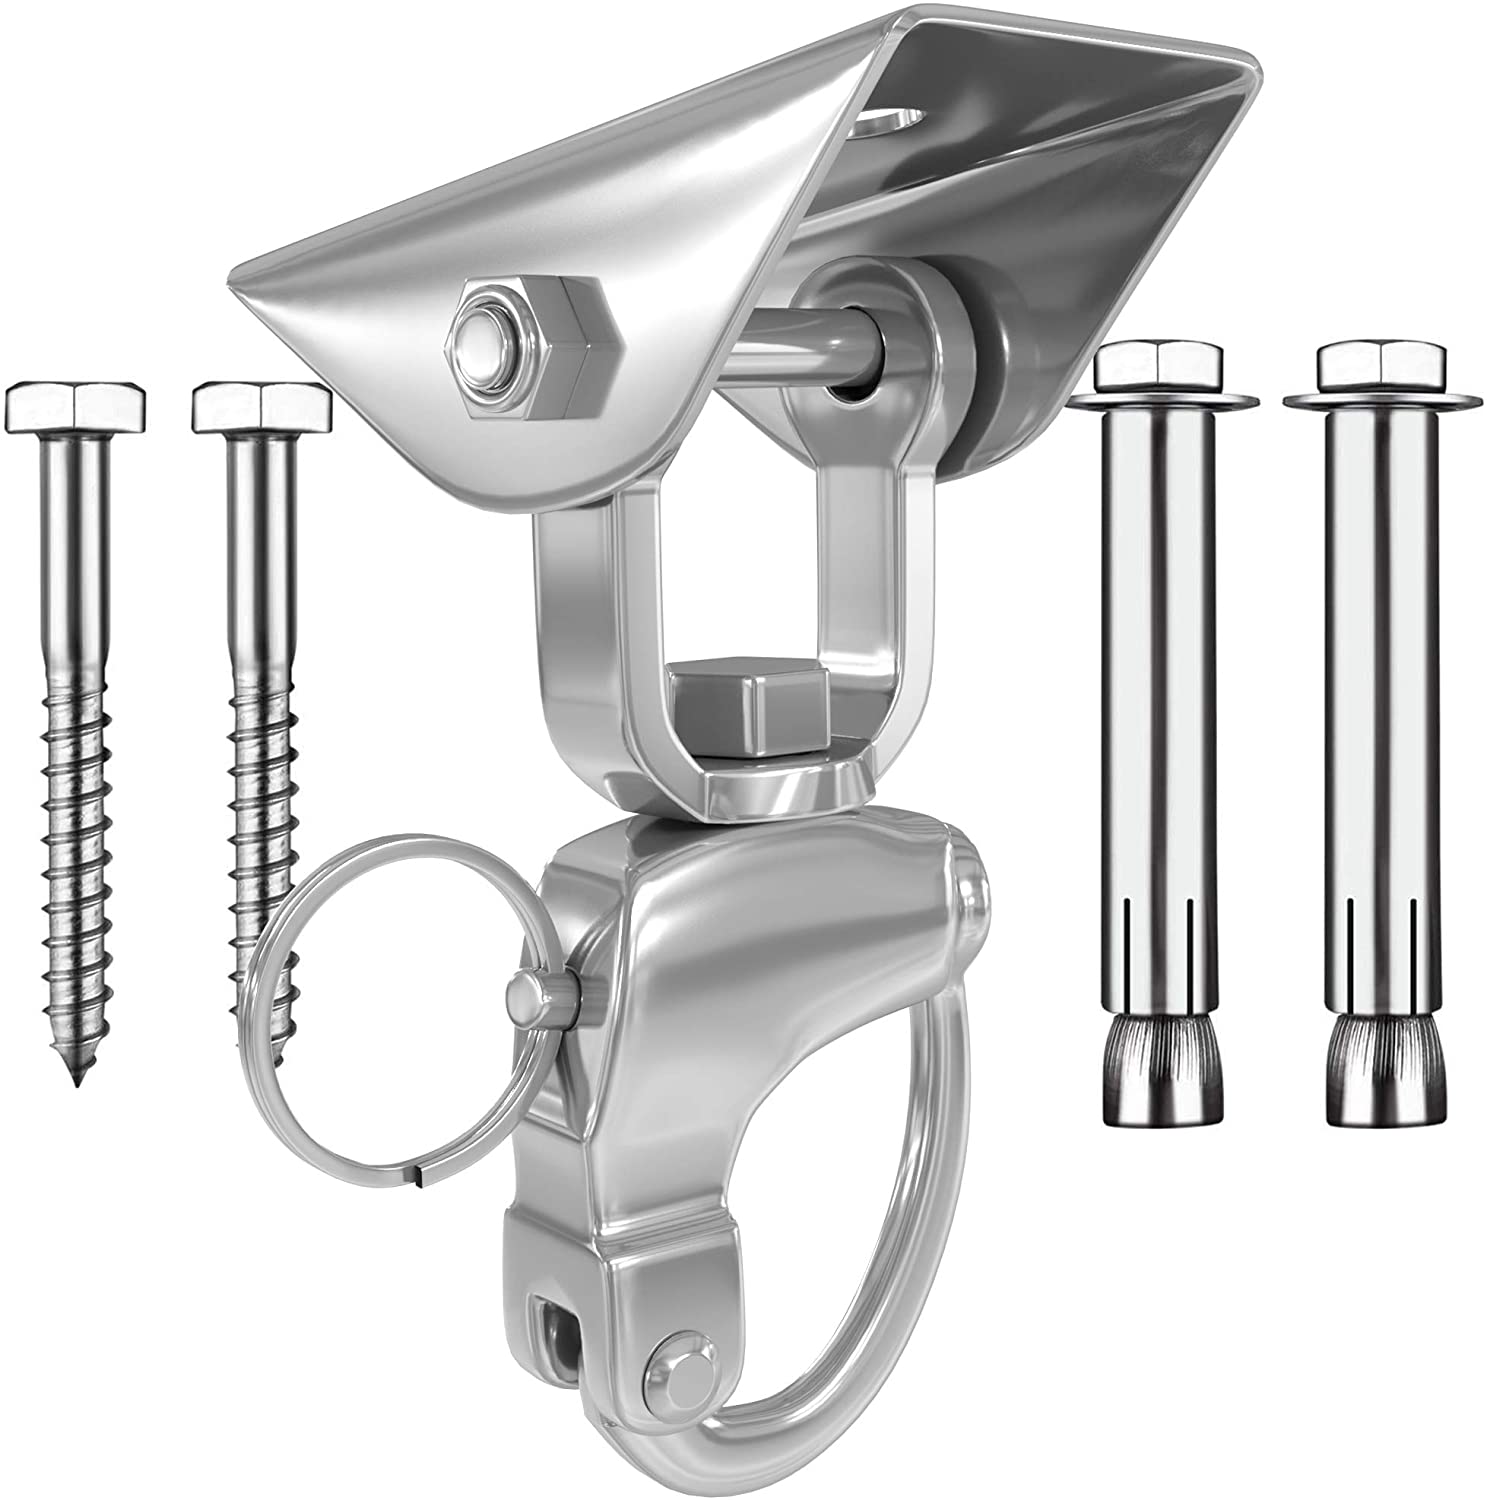 Senshi Japan Stainless Steel Anti Rust 360 Punch Bag Suspension Ceiling Hook Speedball Ceiling Bracket - Wall And Ceiling Mount For Heavy Punch Boxing